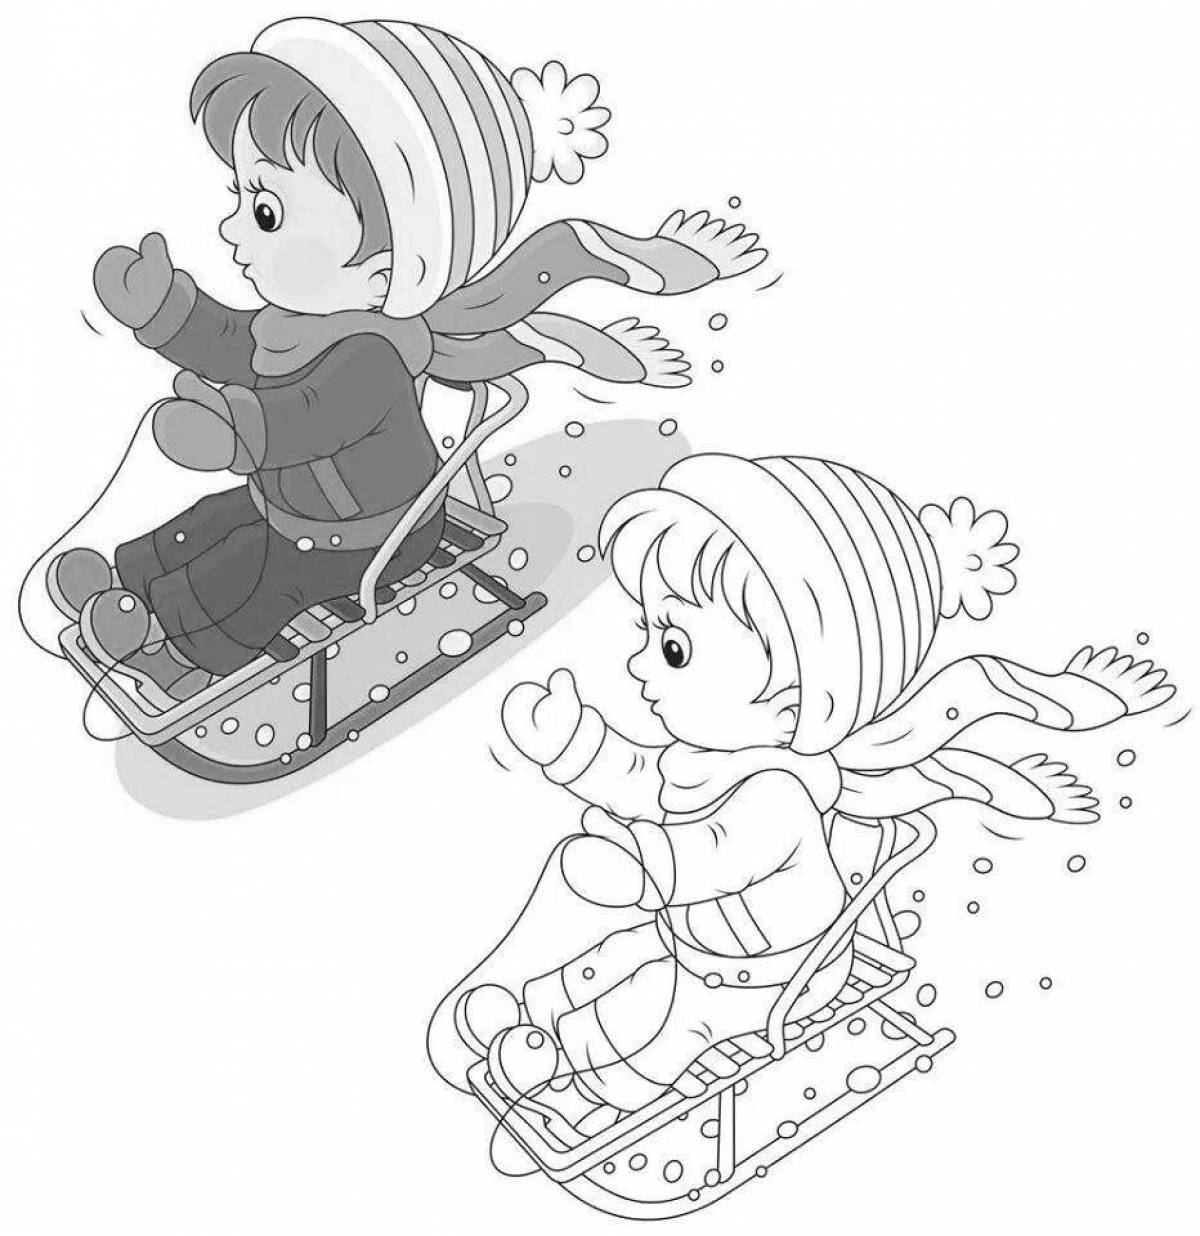 Coloring book adventurous child on a sled